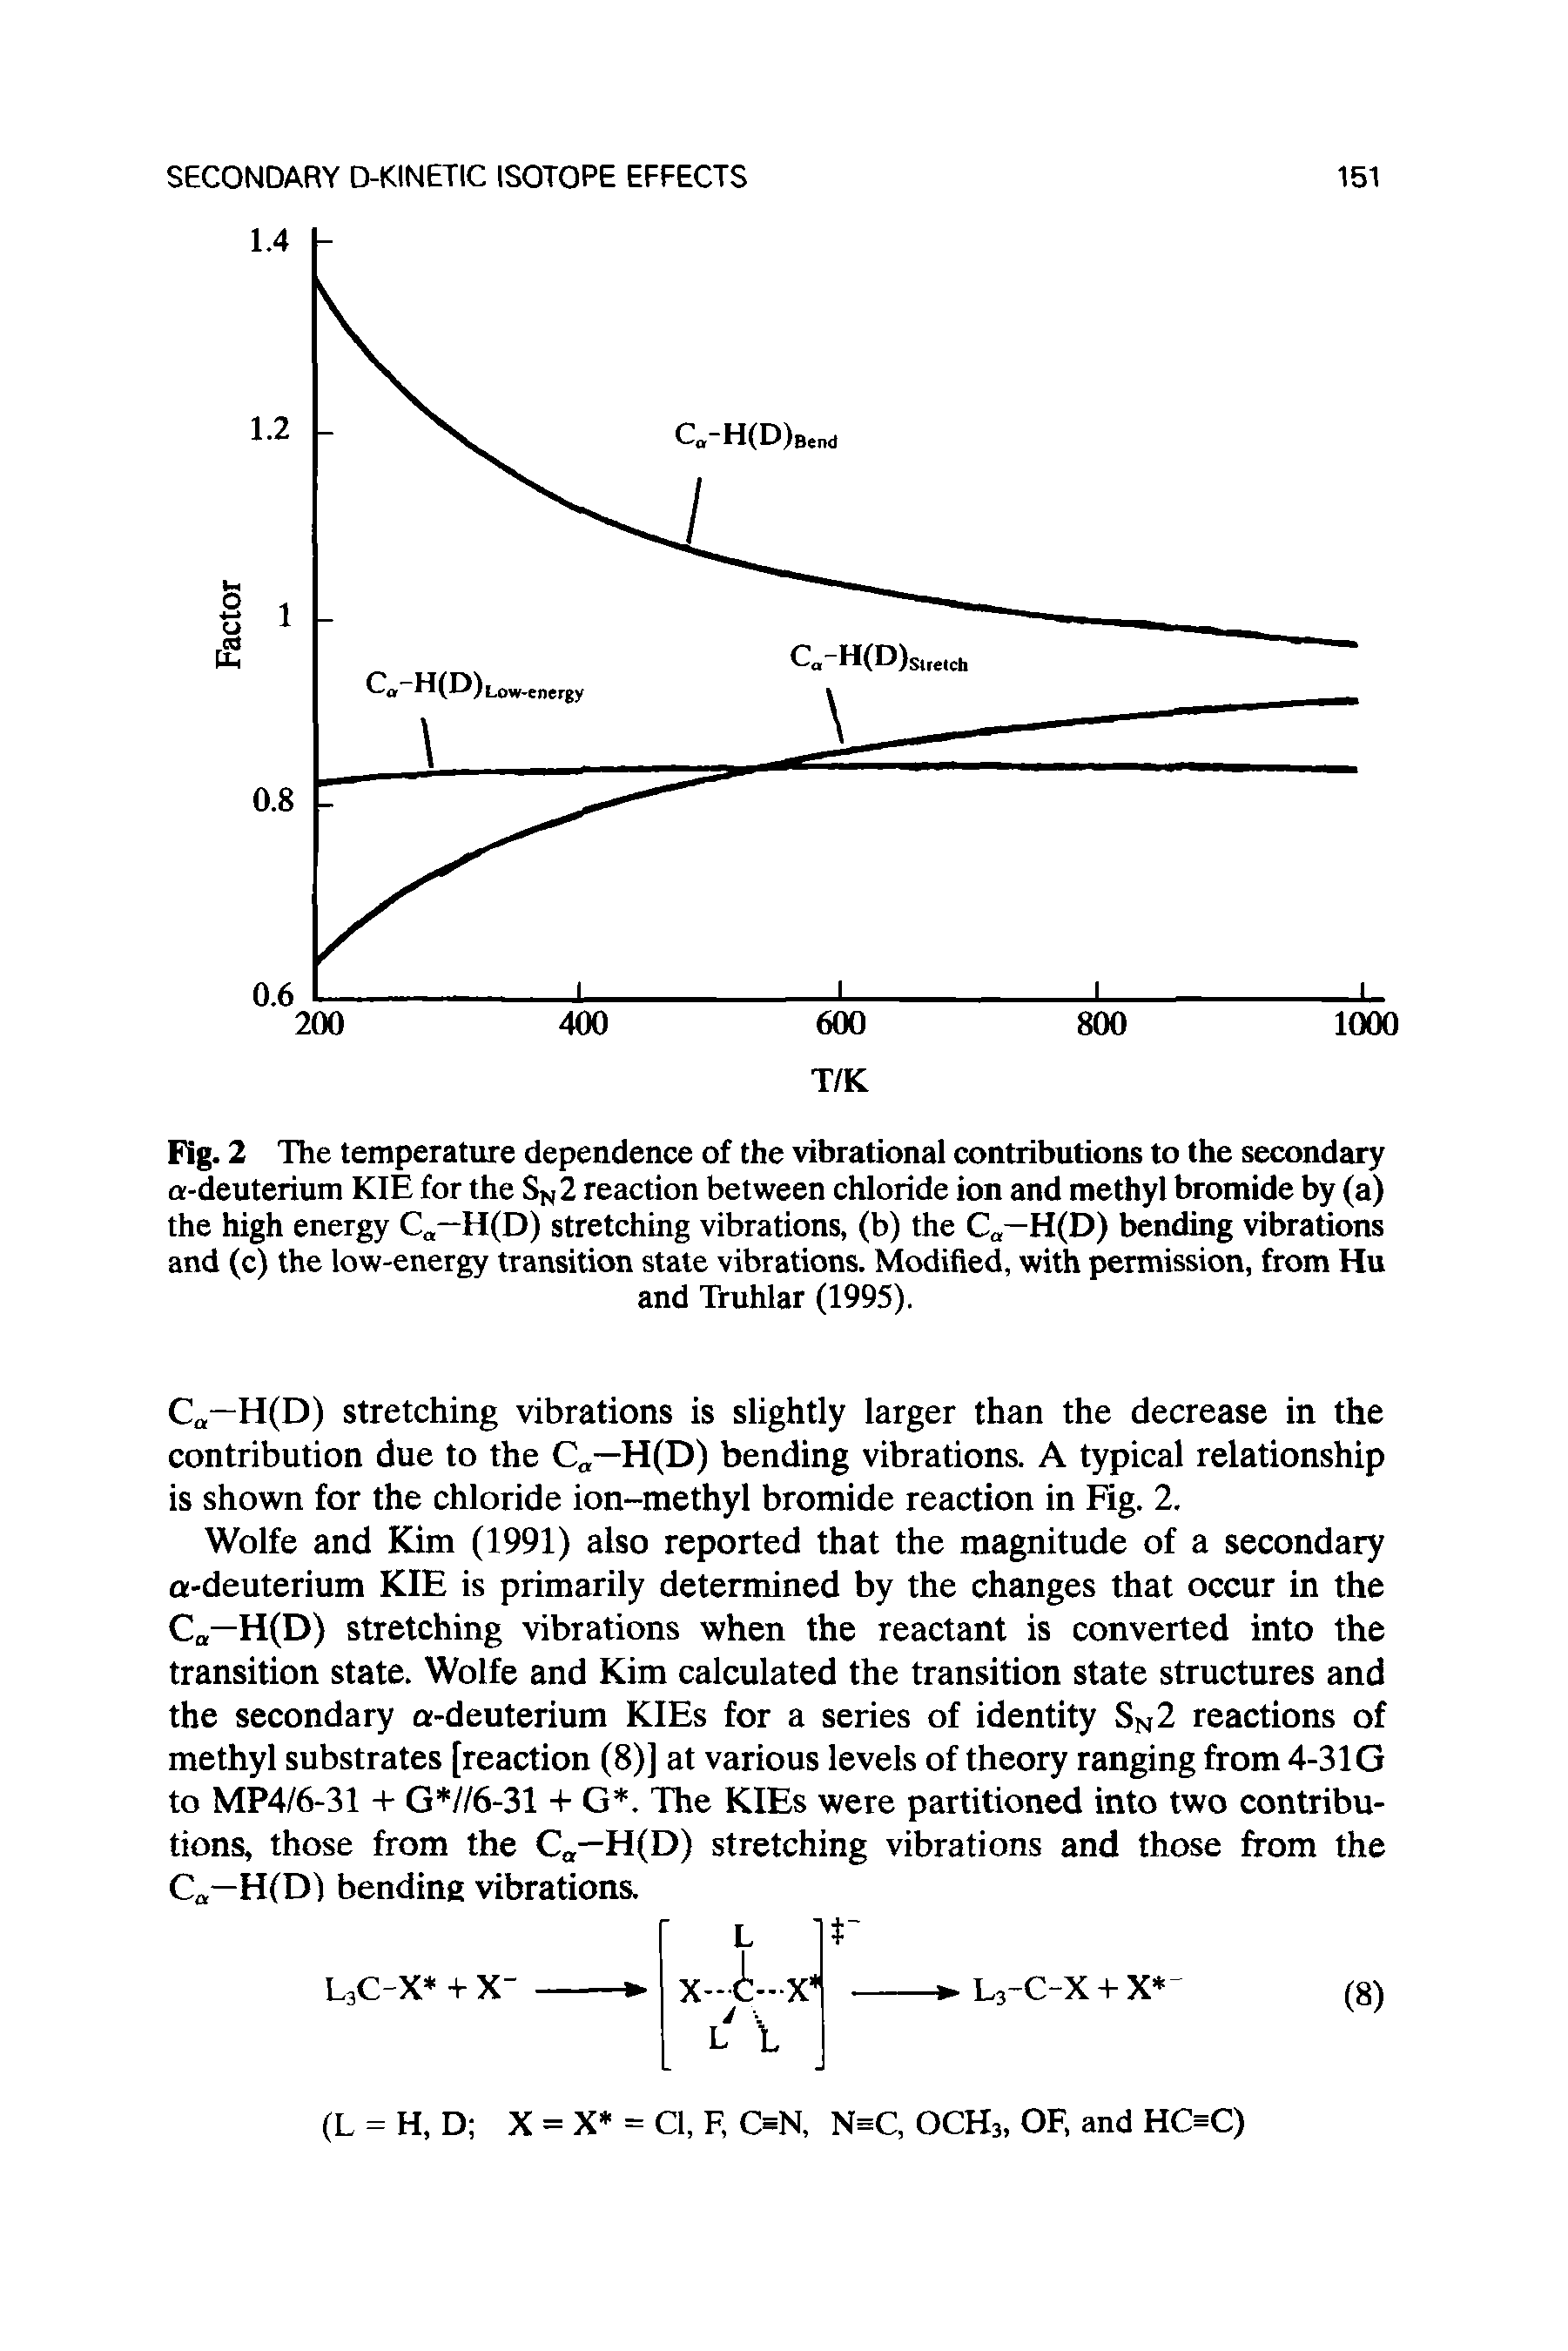 Fig. 2 The temperature dependence of the vibrational contributions to the secondary a-deuterium KIE for the SN2 reaction between chloride ion and methyl bromide by (a) the high energy C —H(D) stretching vibrations, (b) the Ca—H(D) bending vibrations and (c) the low-energy transition state vibrations. Modified, with permission, from Hu...